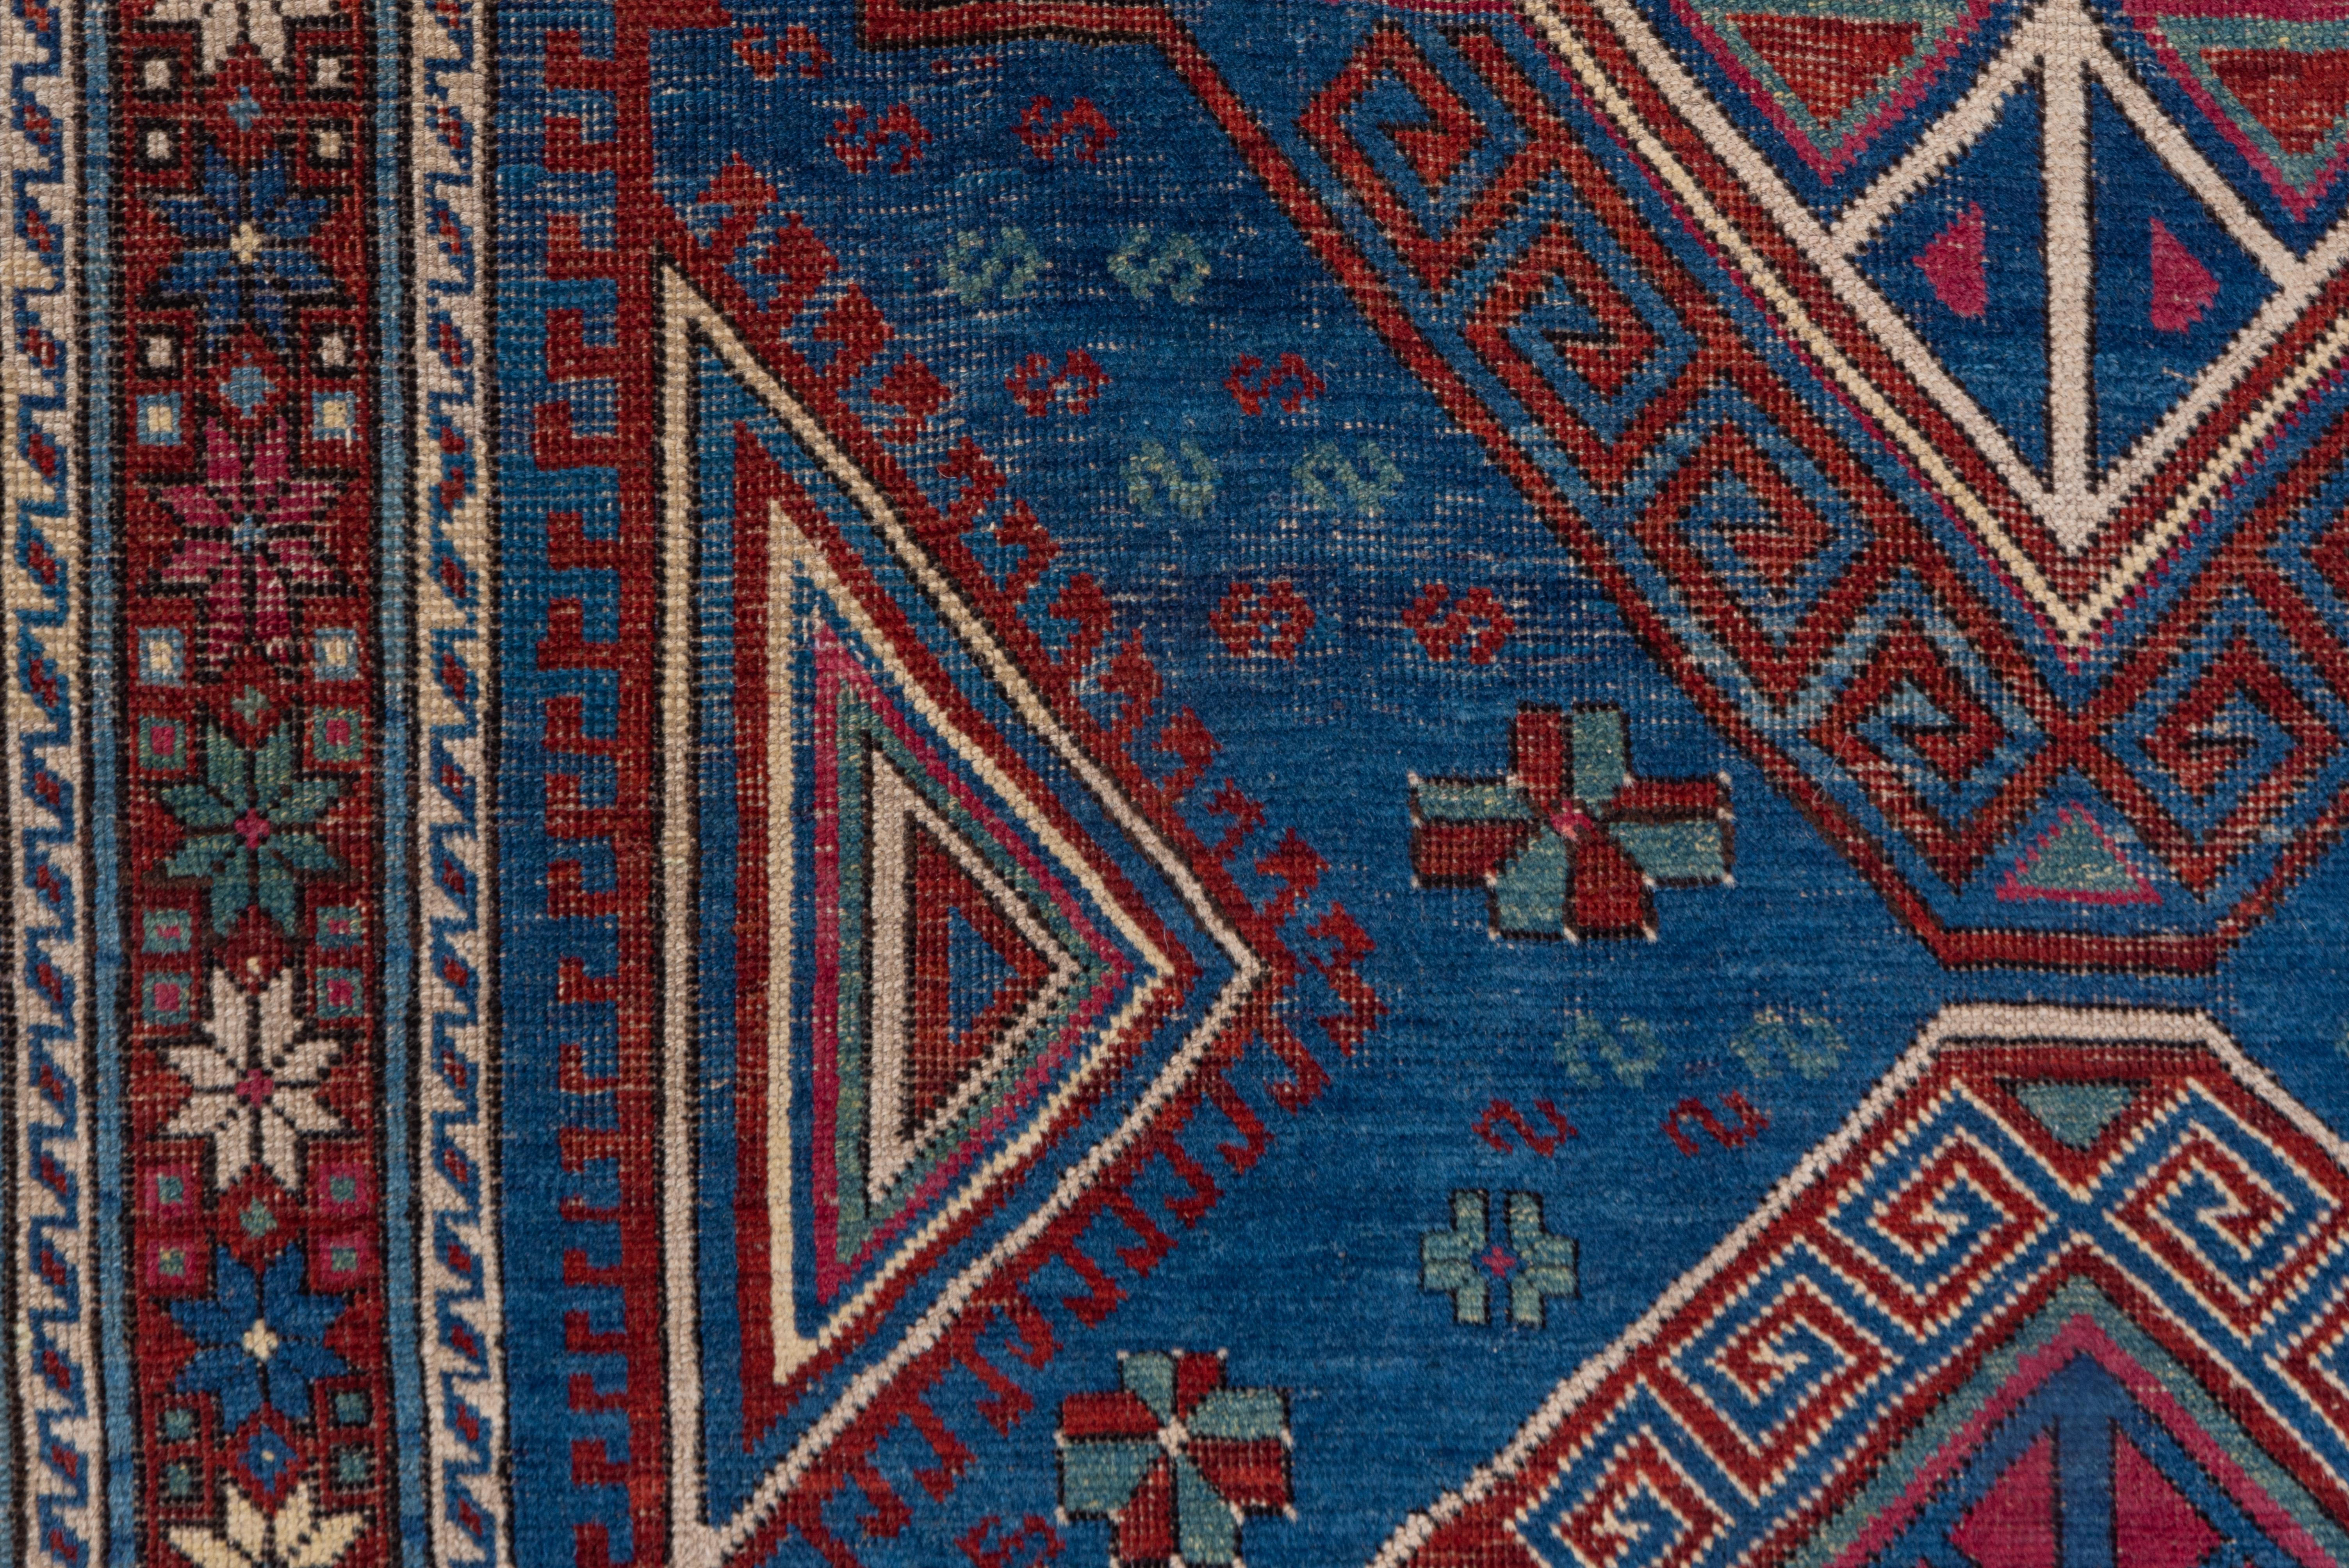 Antique Caucasian Kuba Area Rug, Dark Blue Field, Red Borders, Pink Accents In Good Condition For Sale In New York, NY